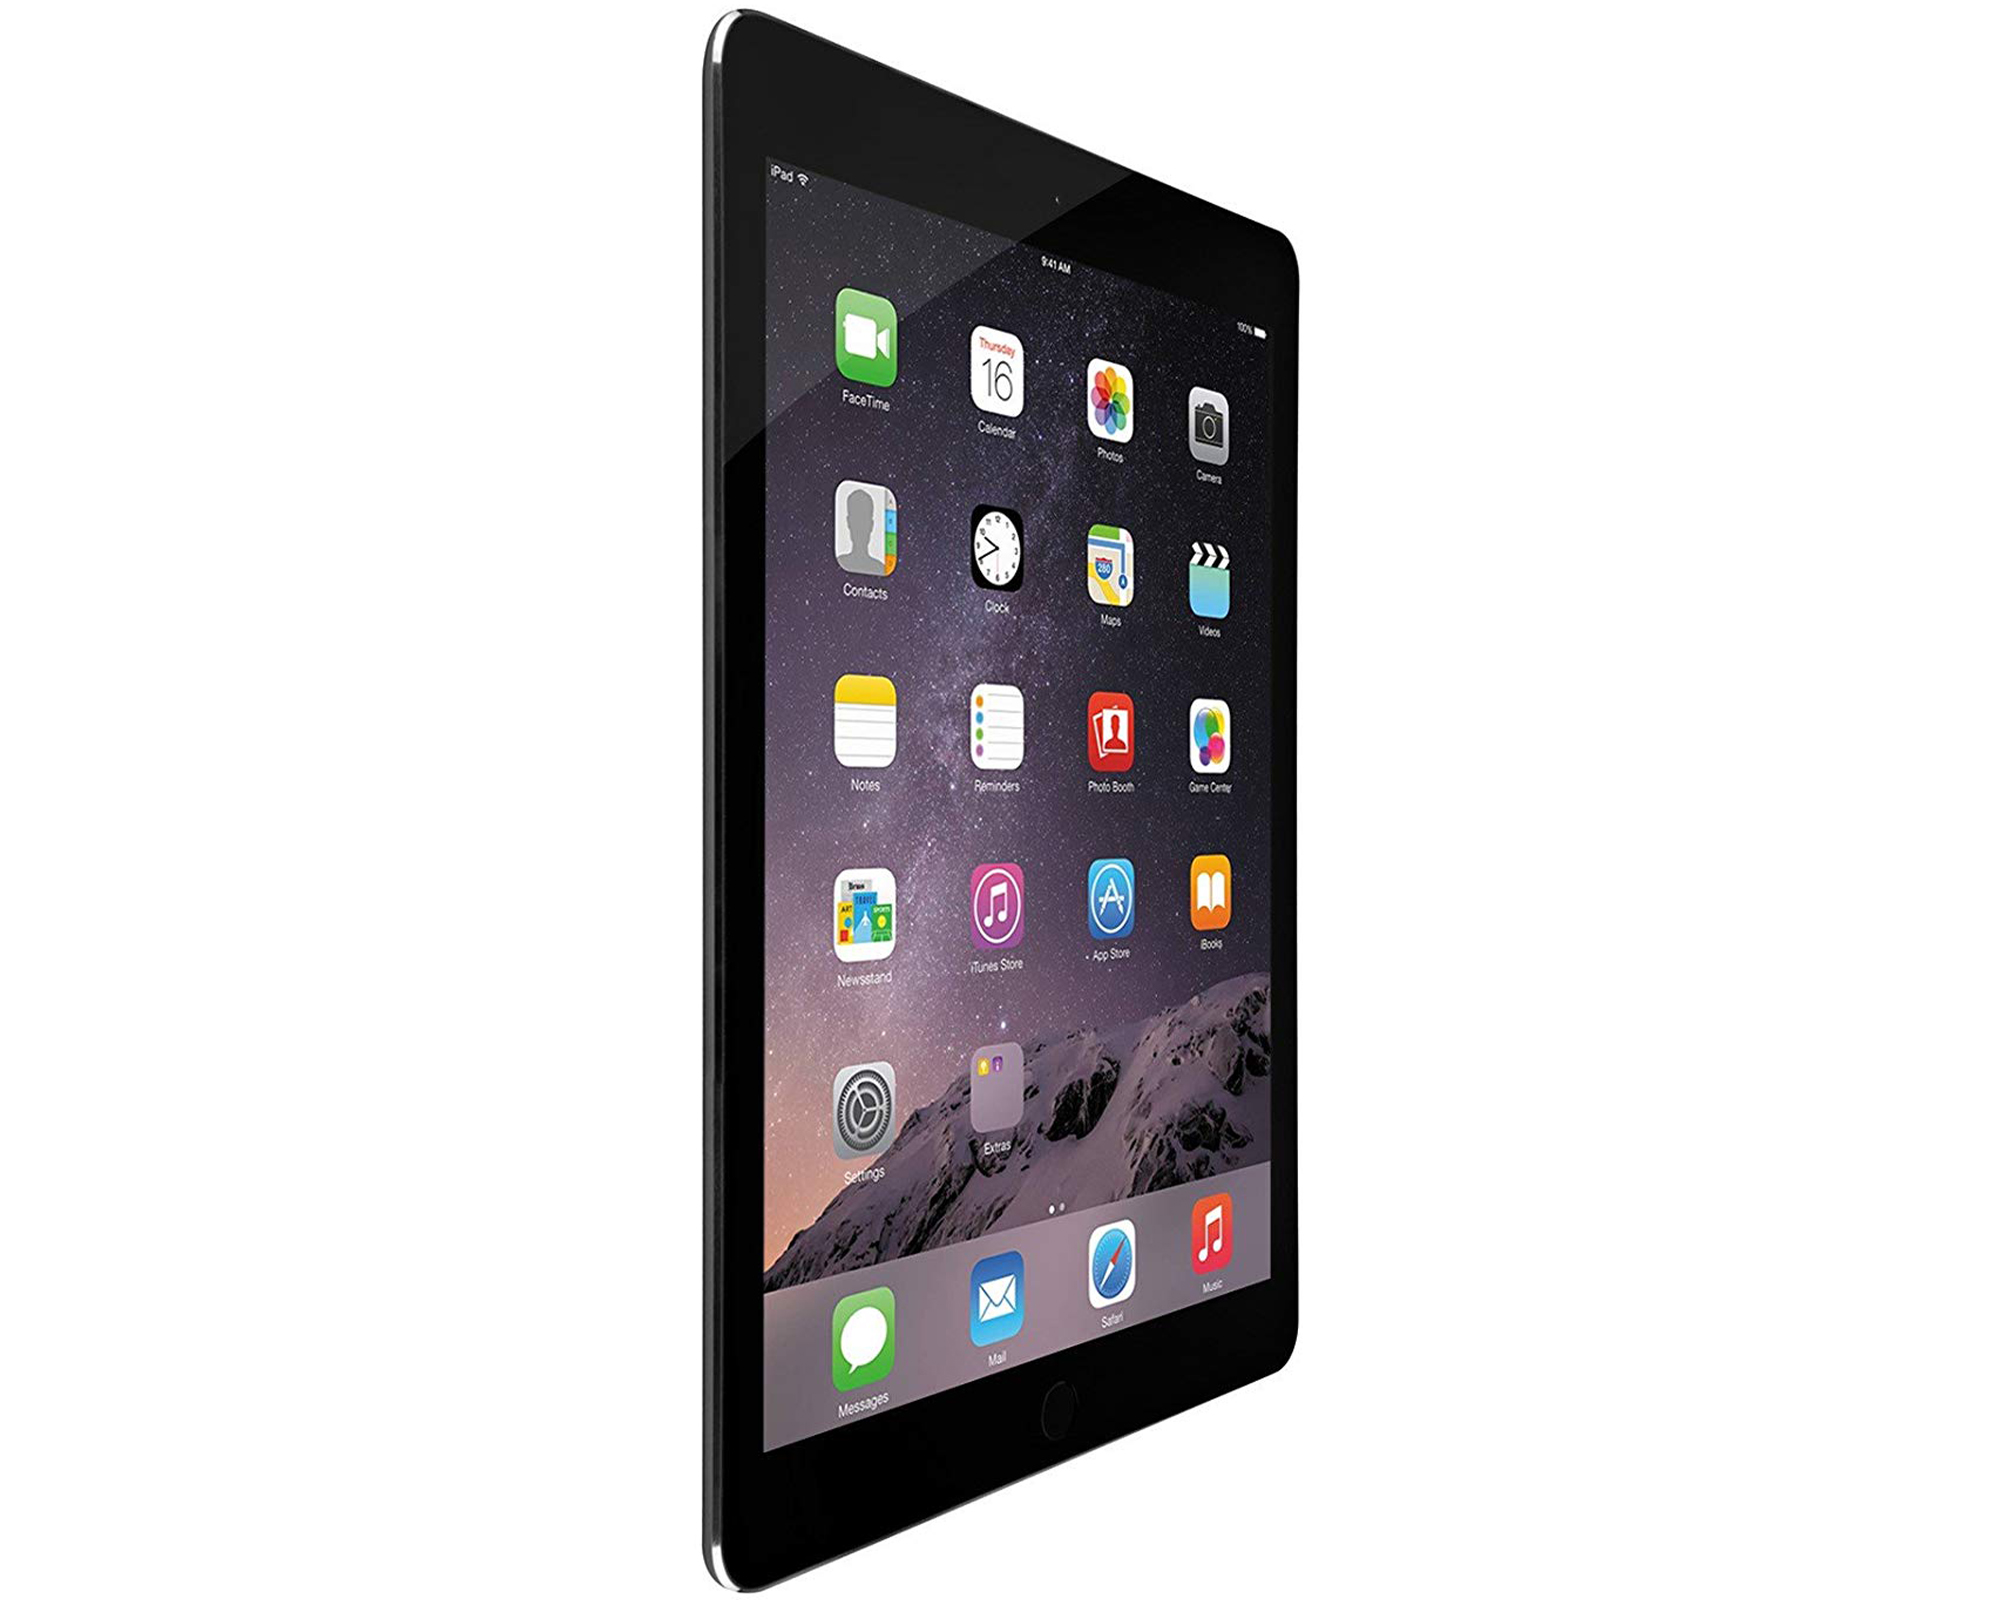 Restored Apple iPad Air 9.7" Retina Display 32GB WiFi Tablet - Space Gray - MD786LL/A (Refurbished) - image 4 of 5